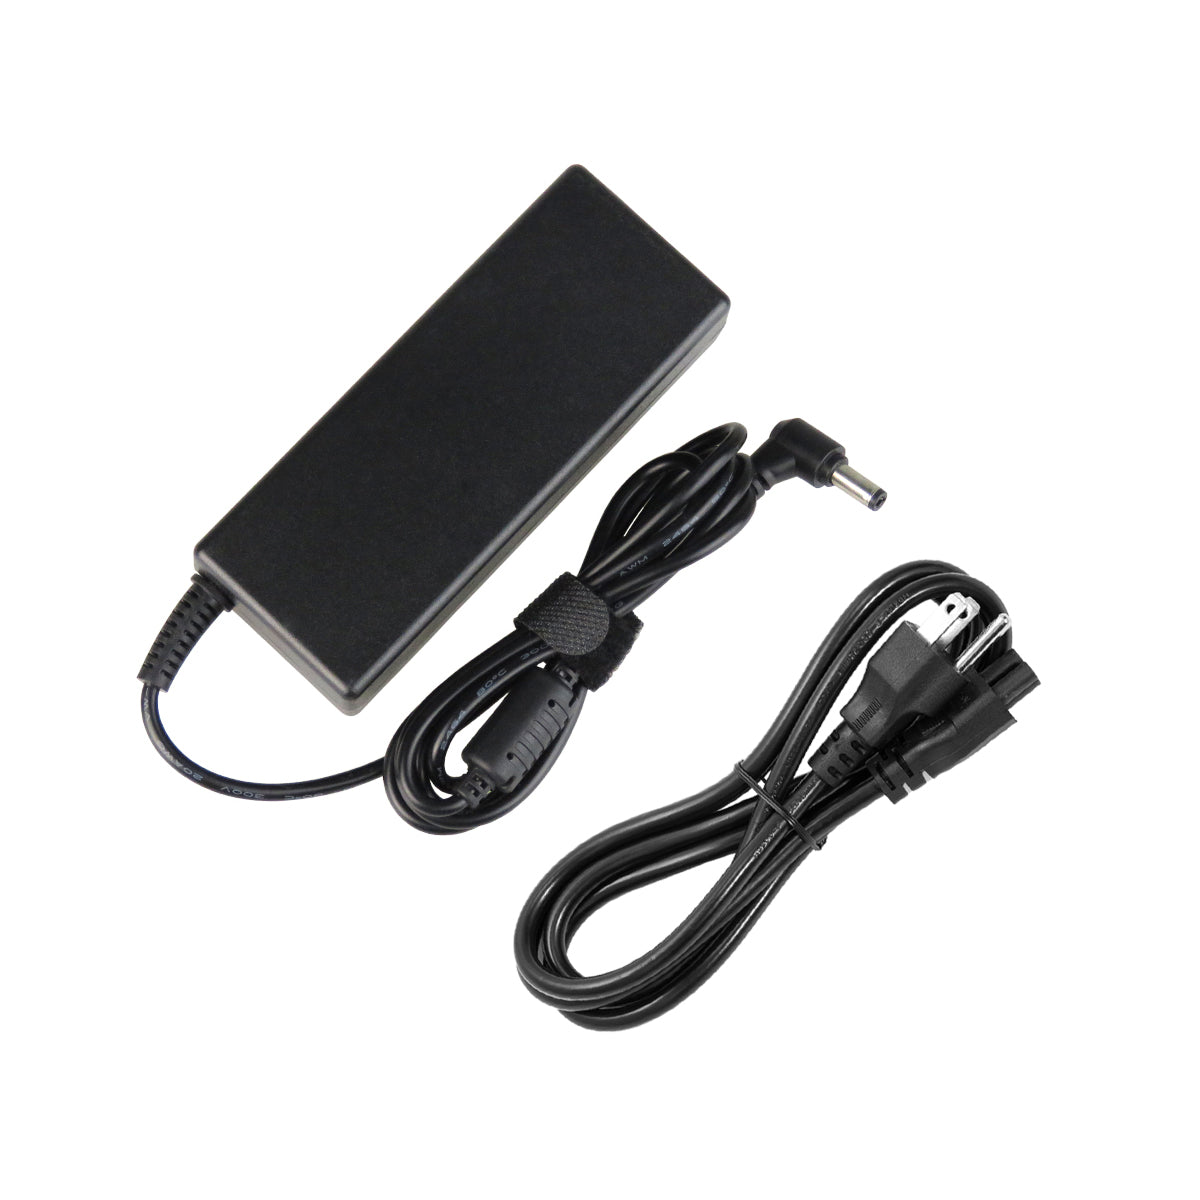 AC Adapter Charger for ASUS X75 Notebook.